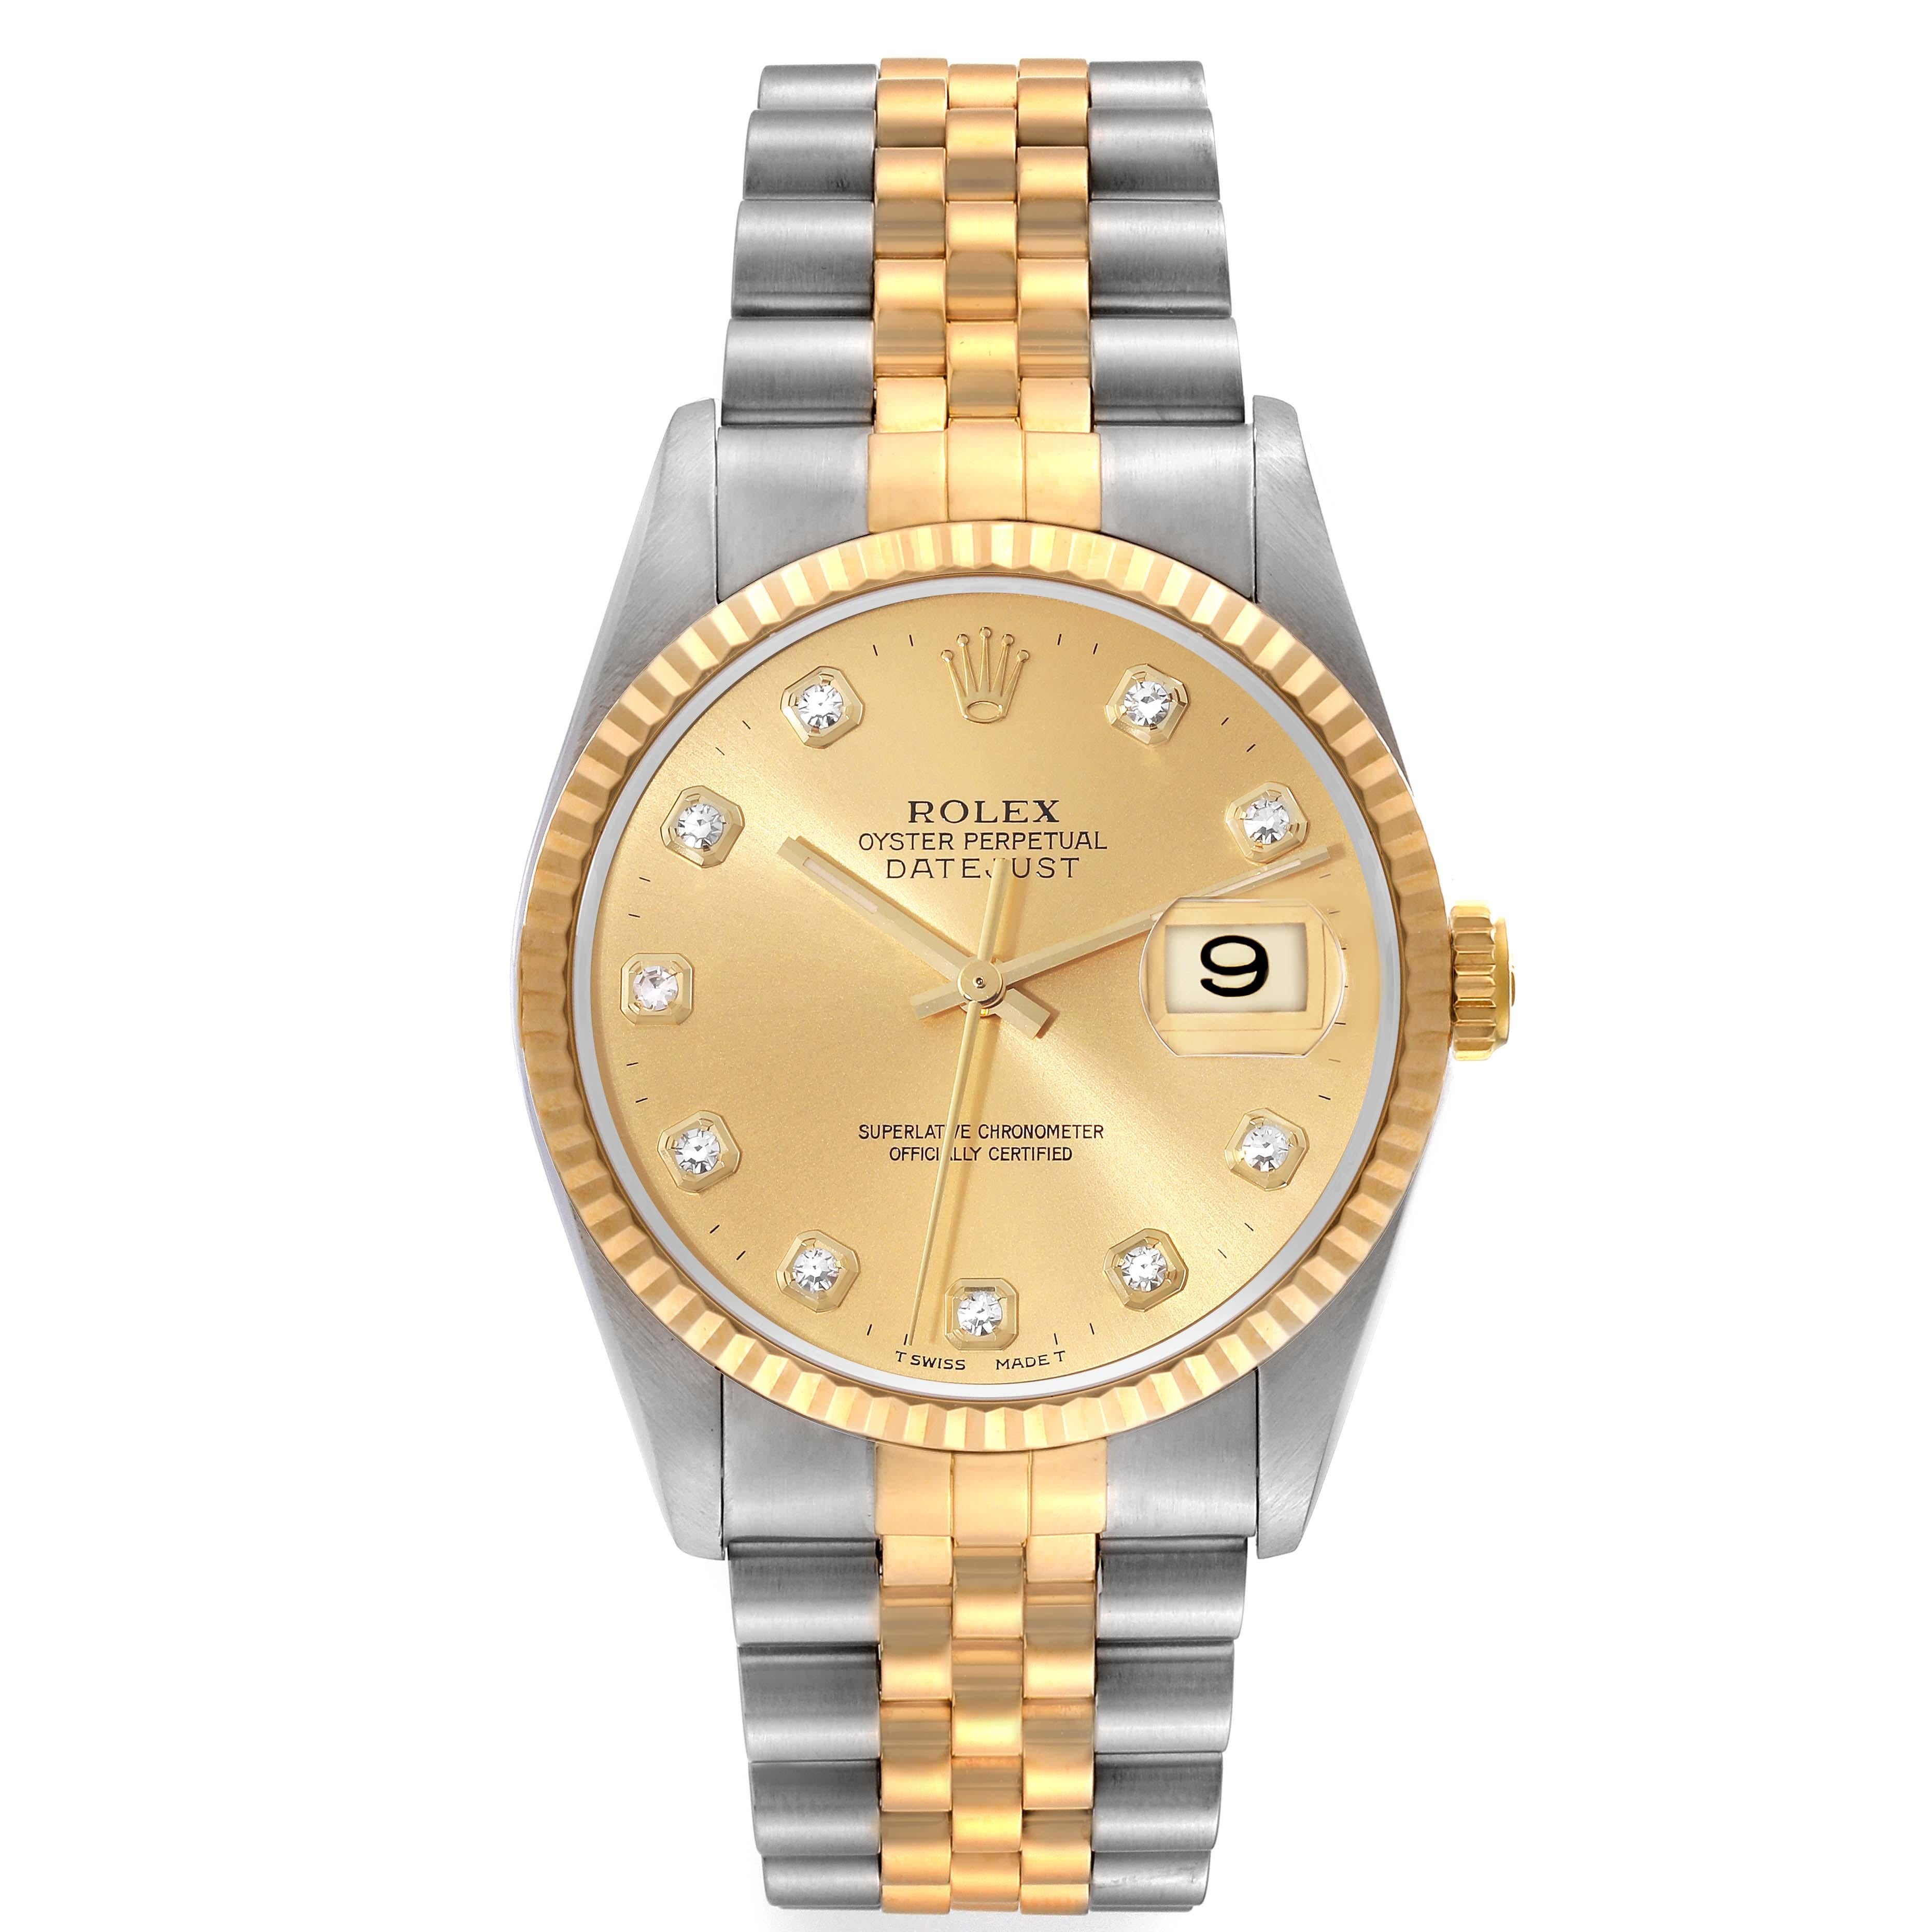 Rolex Datejust Diamond Dial Steel Yellow Gold Mens Watch 16233 Box Papers For Sale 2